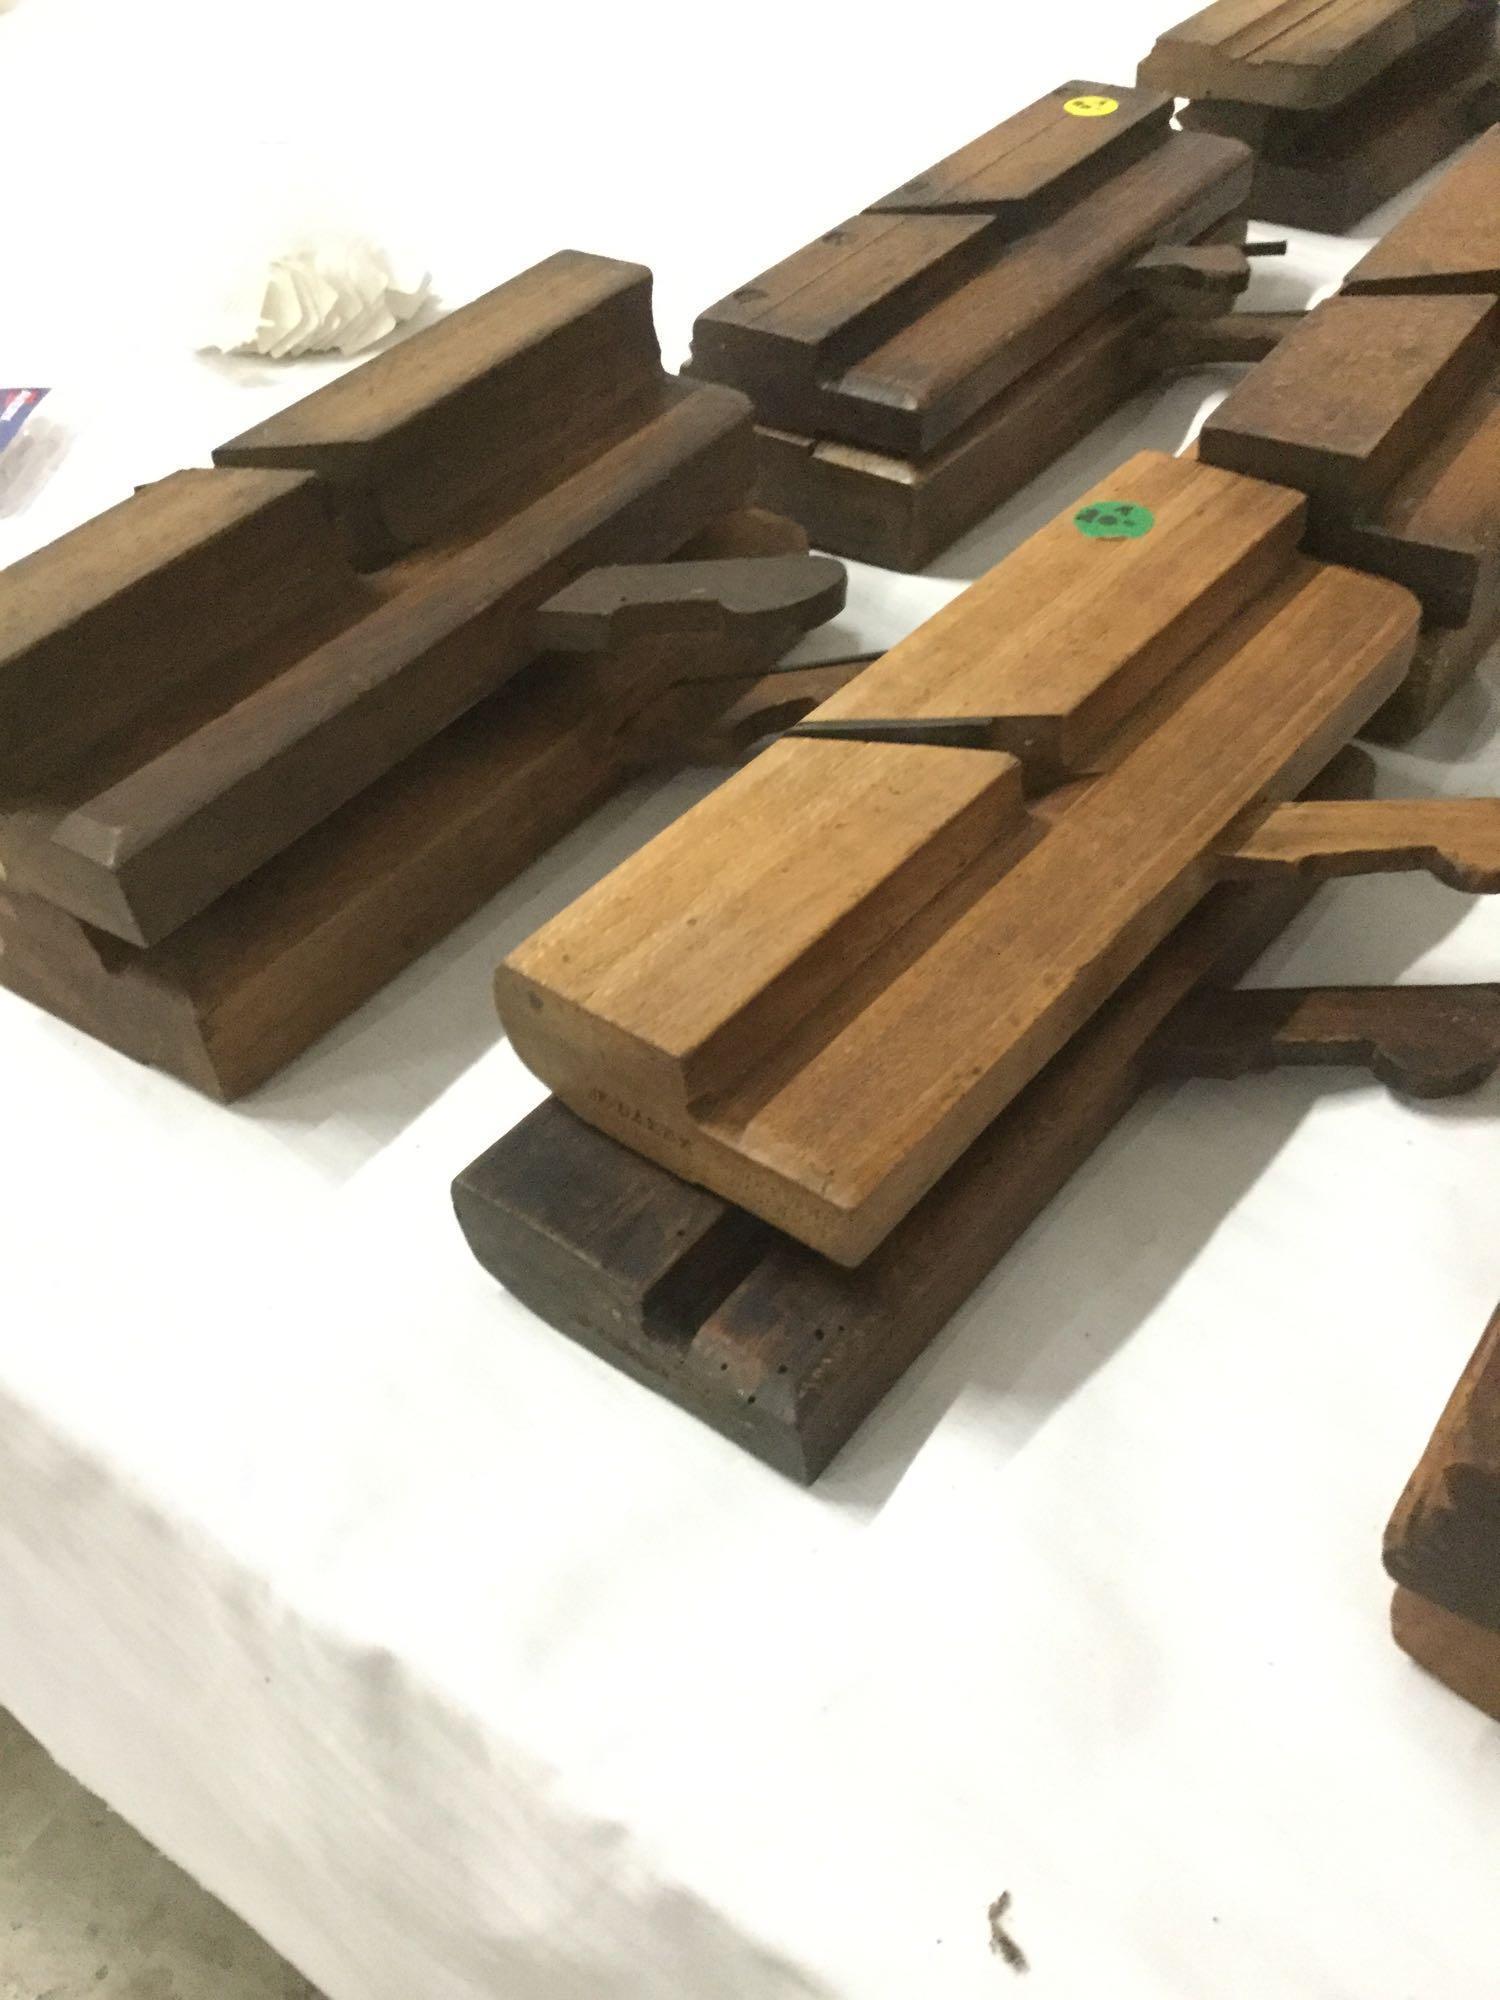 Massive antique tool lot - 25 planers, files, wrench, hanging beam scale & more primitives!